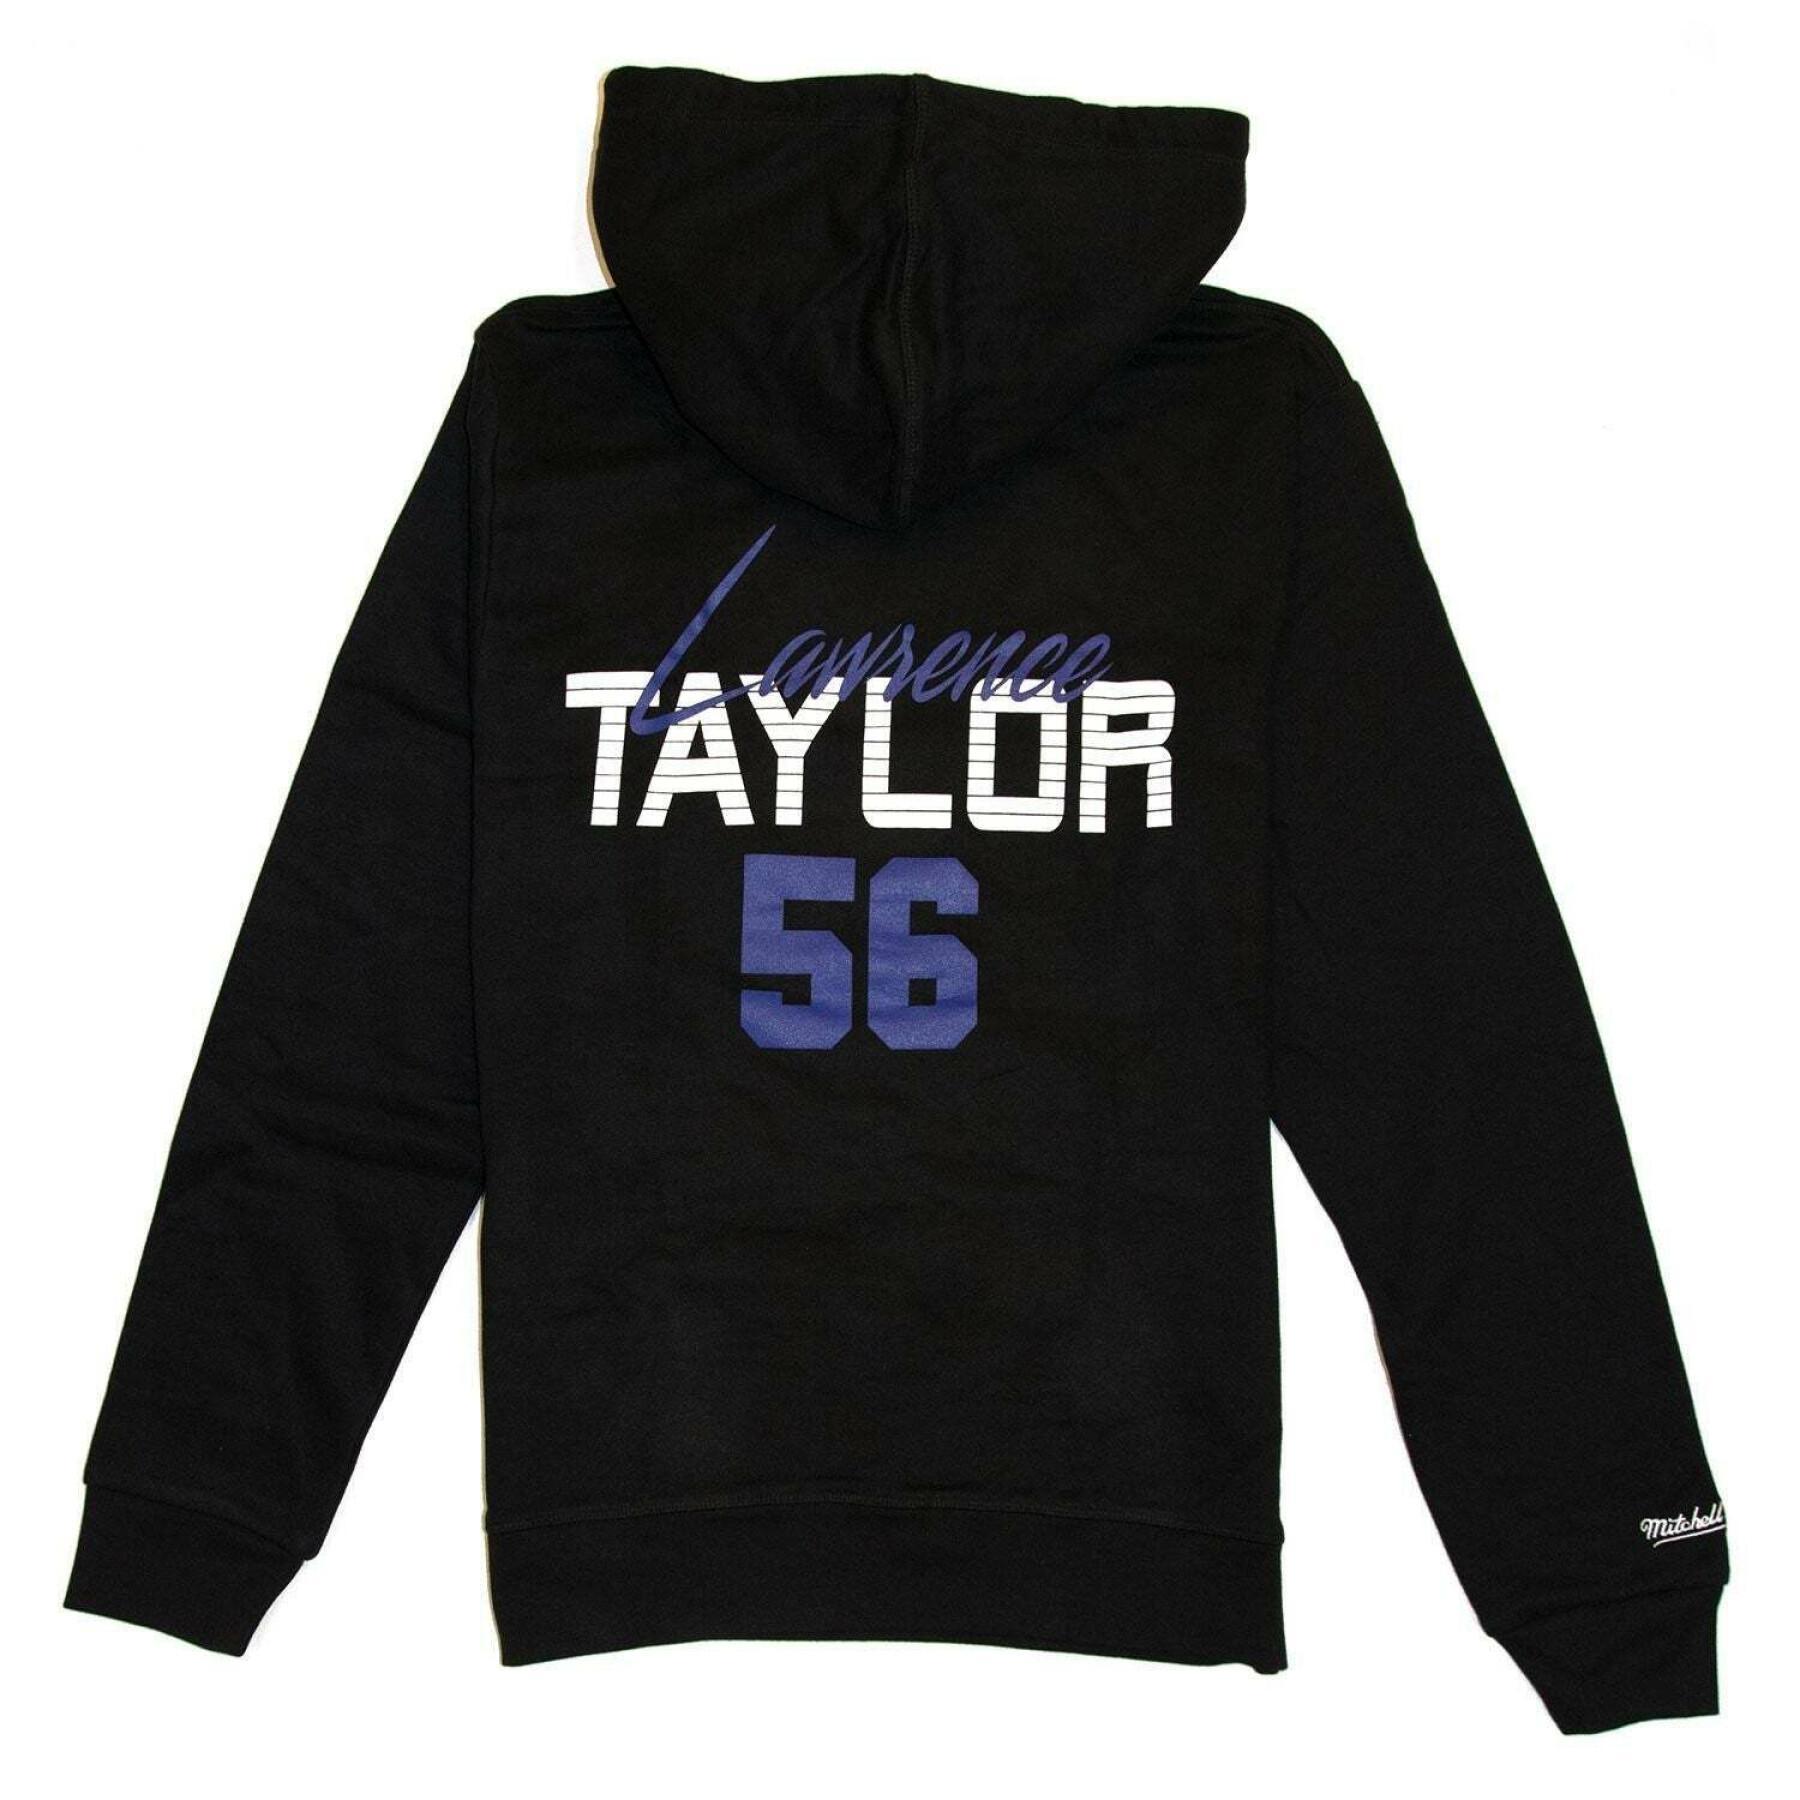 Sudadera con capucha New York Giants superbowl 80s Lawerence Taylor